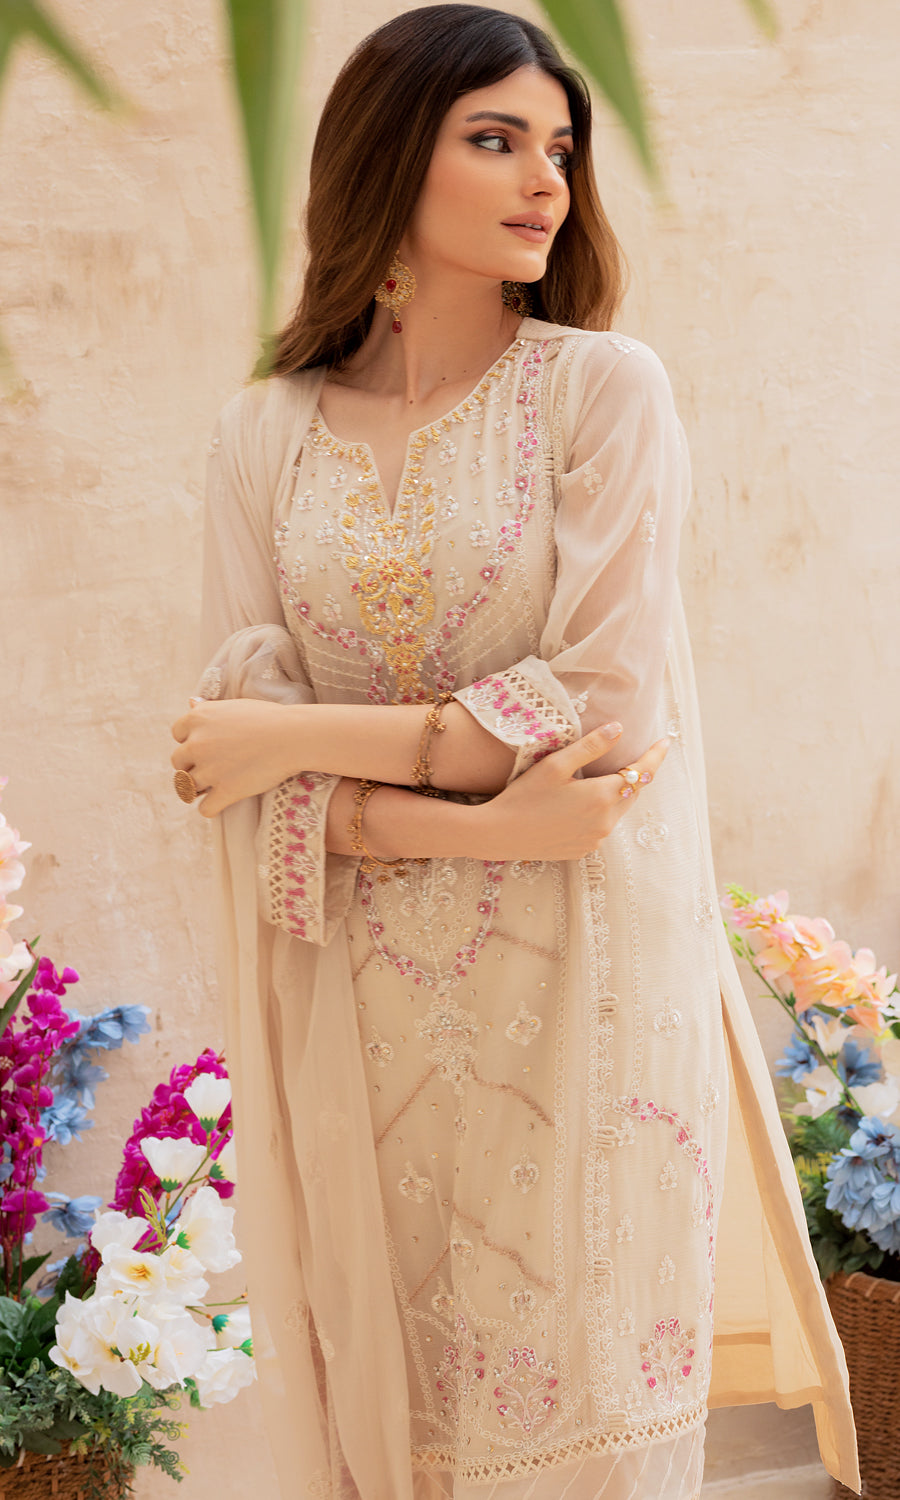 Shamooz- Mushq volume 3. This elegance with style masterpiece with pastel color and embrodiery work on the front and side panel that enhances a blush of color.This elegant hand-embellished add-on sparkle of glamour.This ensemble is a perfect balance of every occassion.